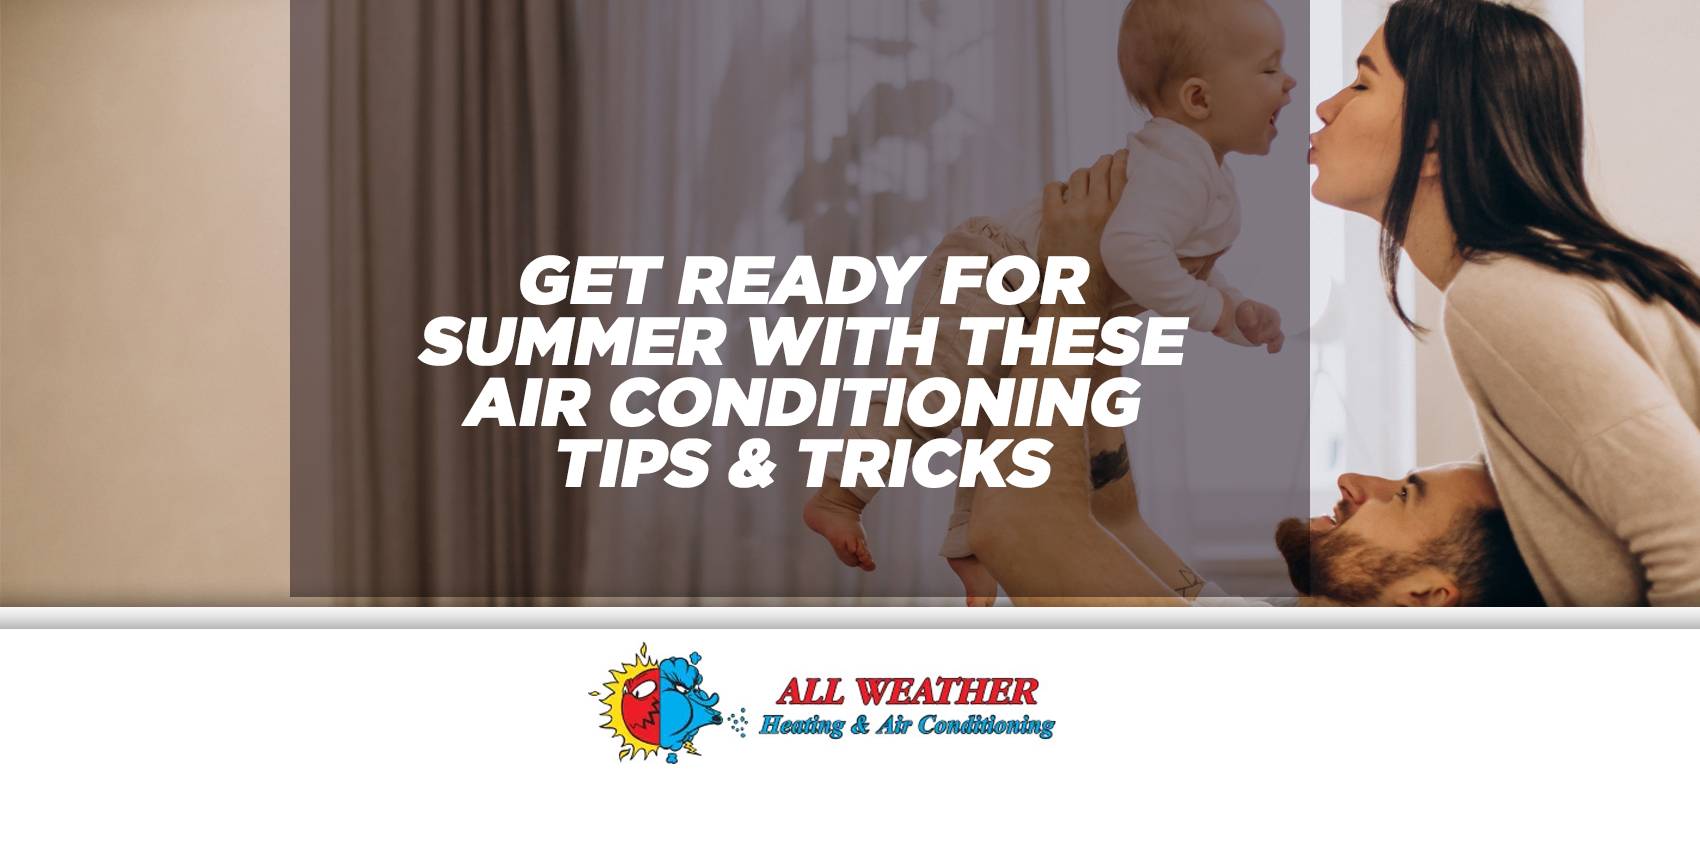 Get ready for summer with these AC tips and tricks